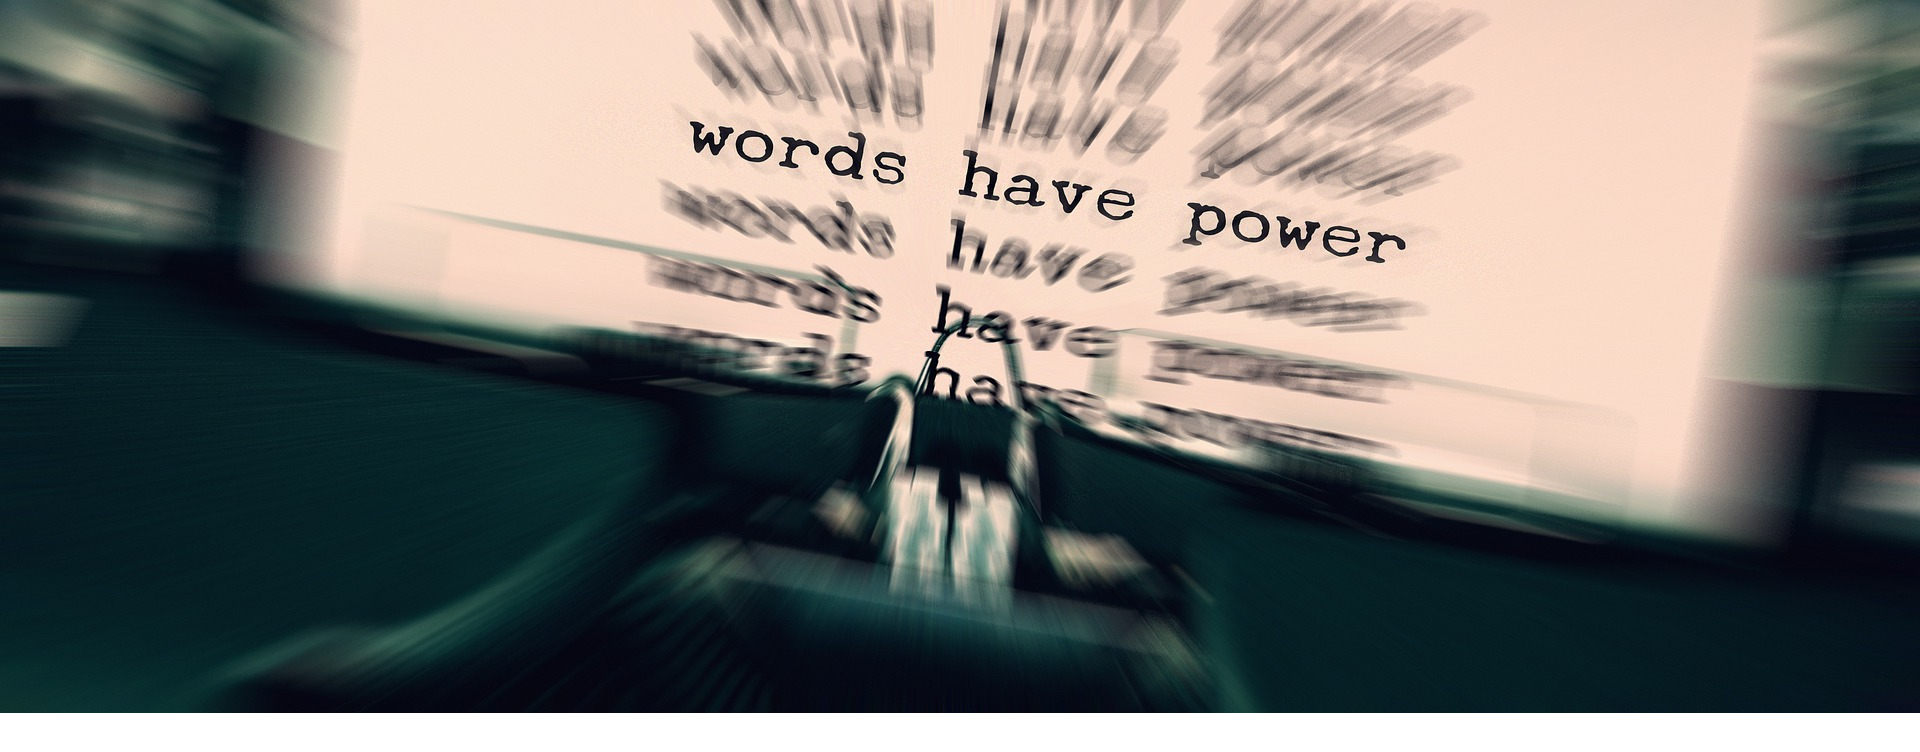 texto: words have power